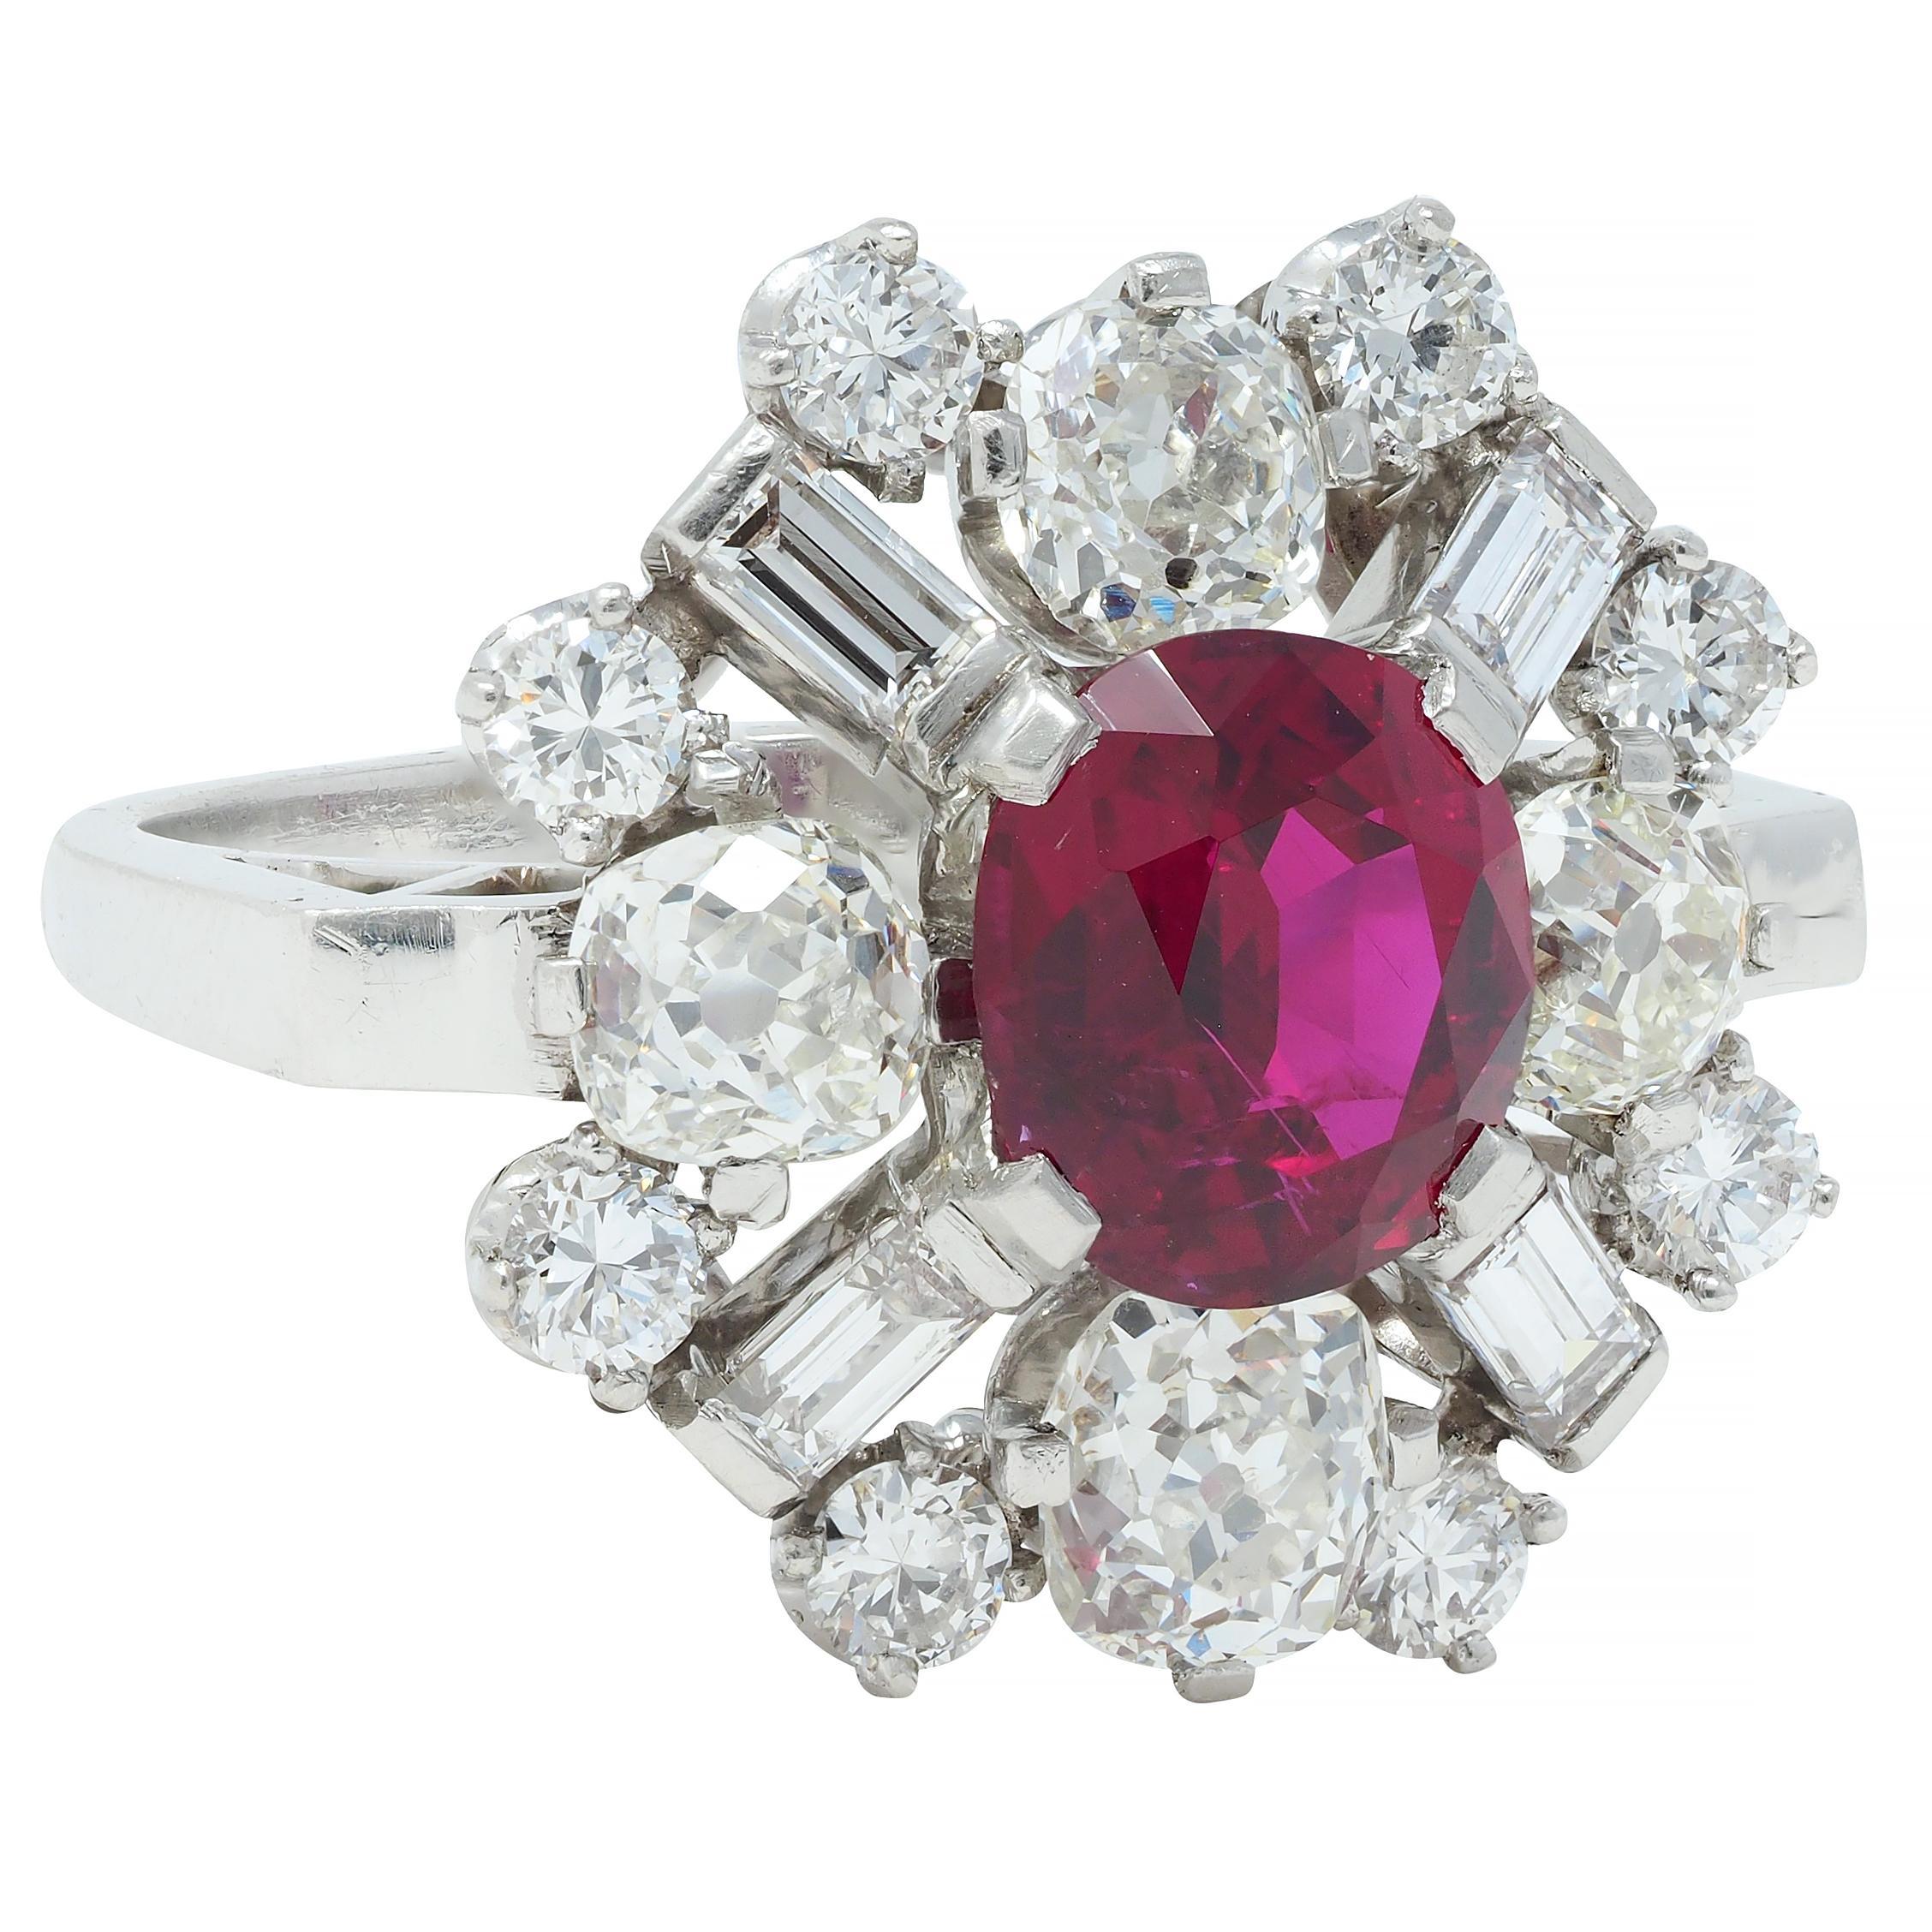 Centering an oval cut ruby weighing 2.17 carats - transparent medium purplish red in color 
Natural Thai in origin - set with tab-like prongs with a clustered burst motif halo
Comprised of old mine, transitional, and baguette cut diamonds 
Weighing